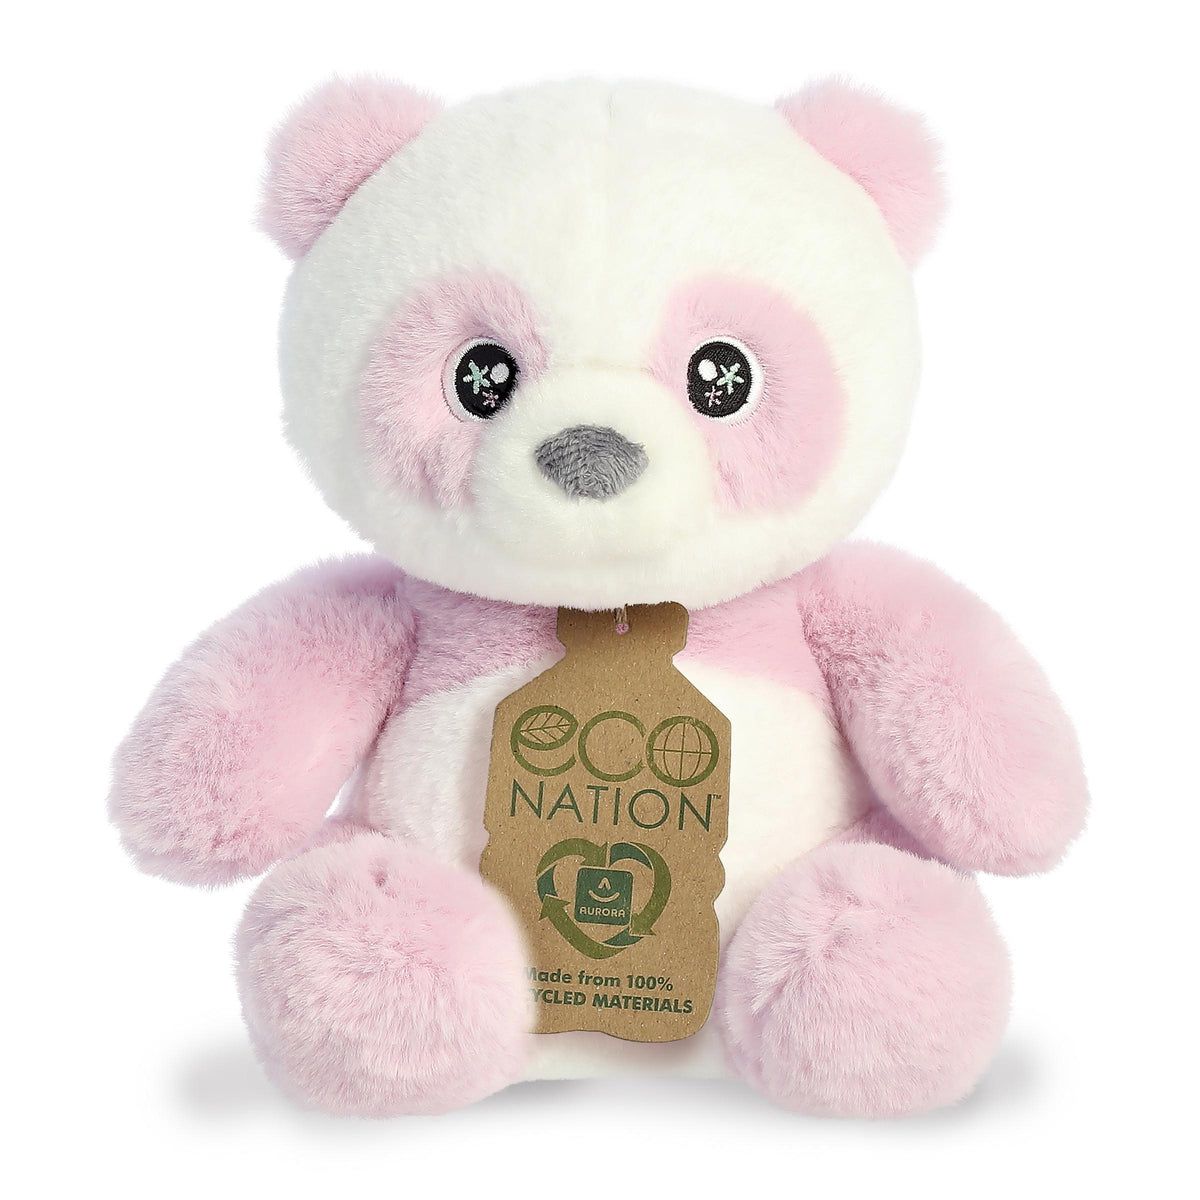 Lovely panda plush that is a brilliant lavender purple, has sparkling embroidered eyes and an eco-nation tag around its neck